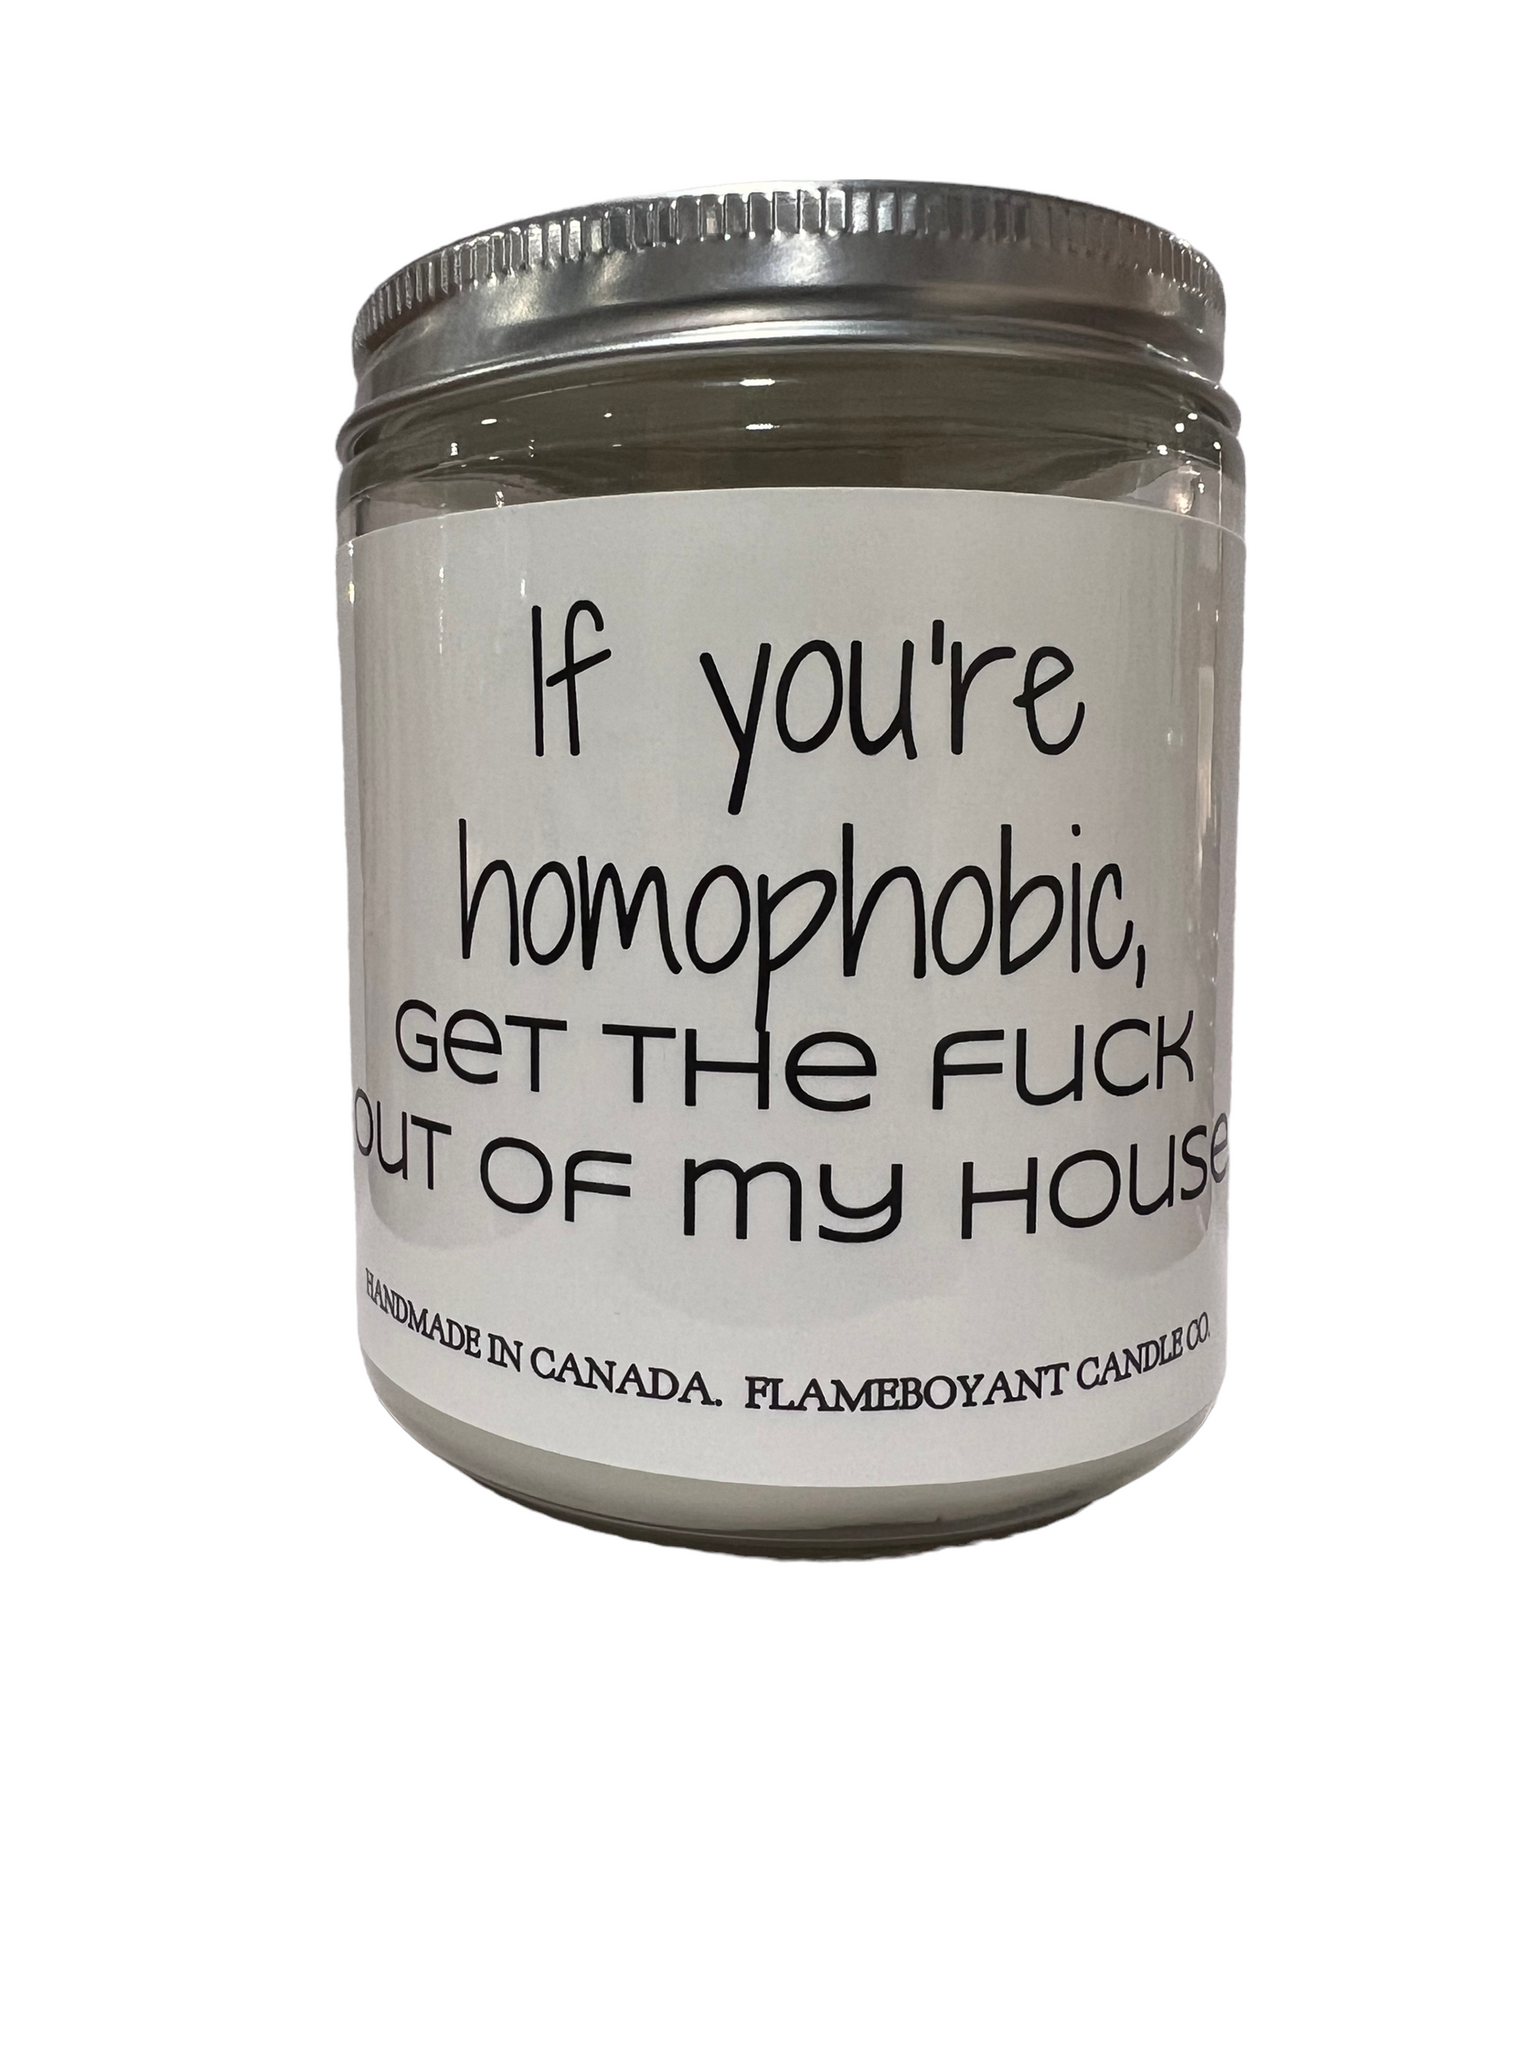 If youre homophobic get the fuck out of my house